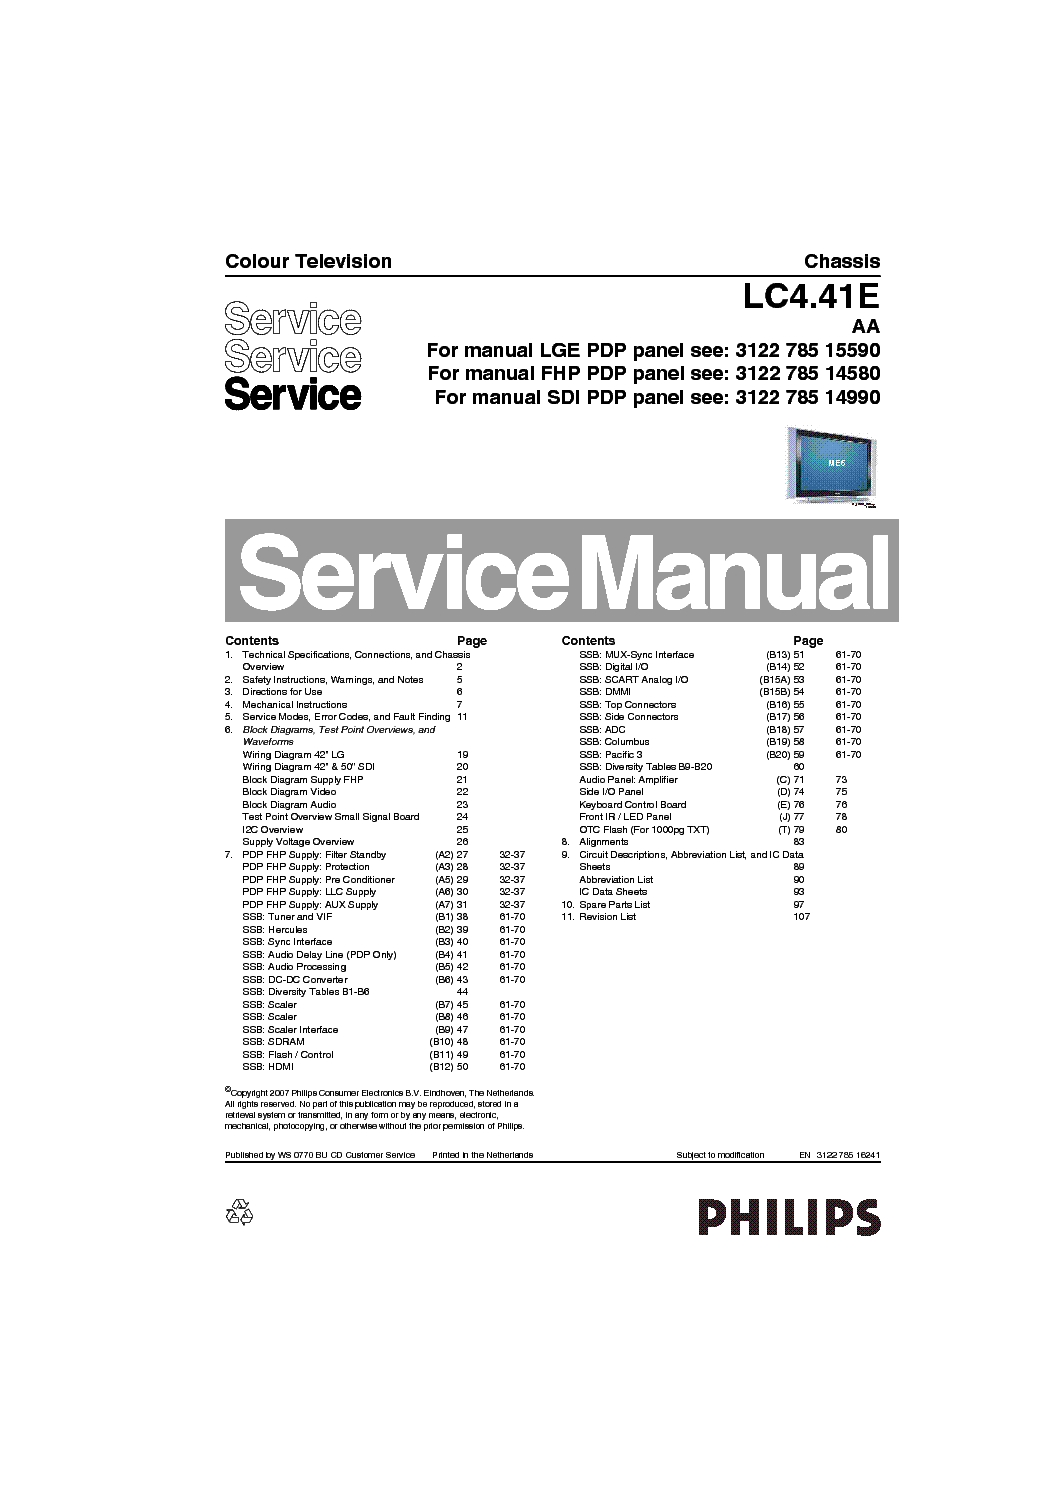 PHILIPS TV CH LC4.41E AA SERVICE MANUAL service manual (1st page)